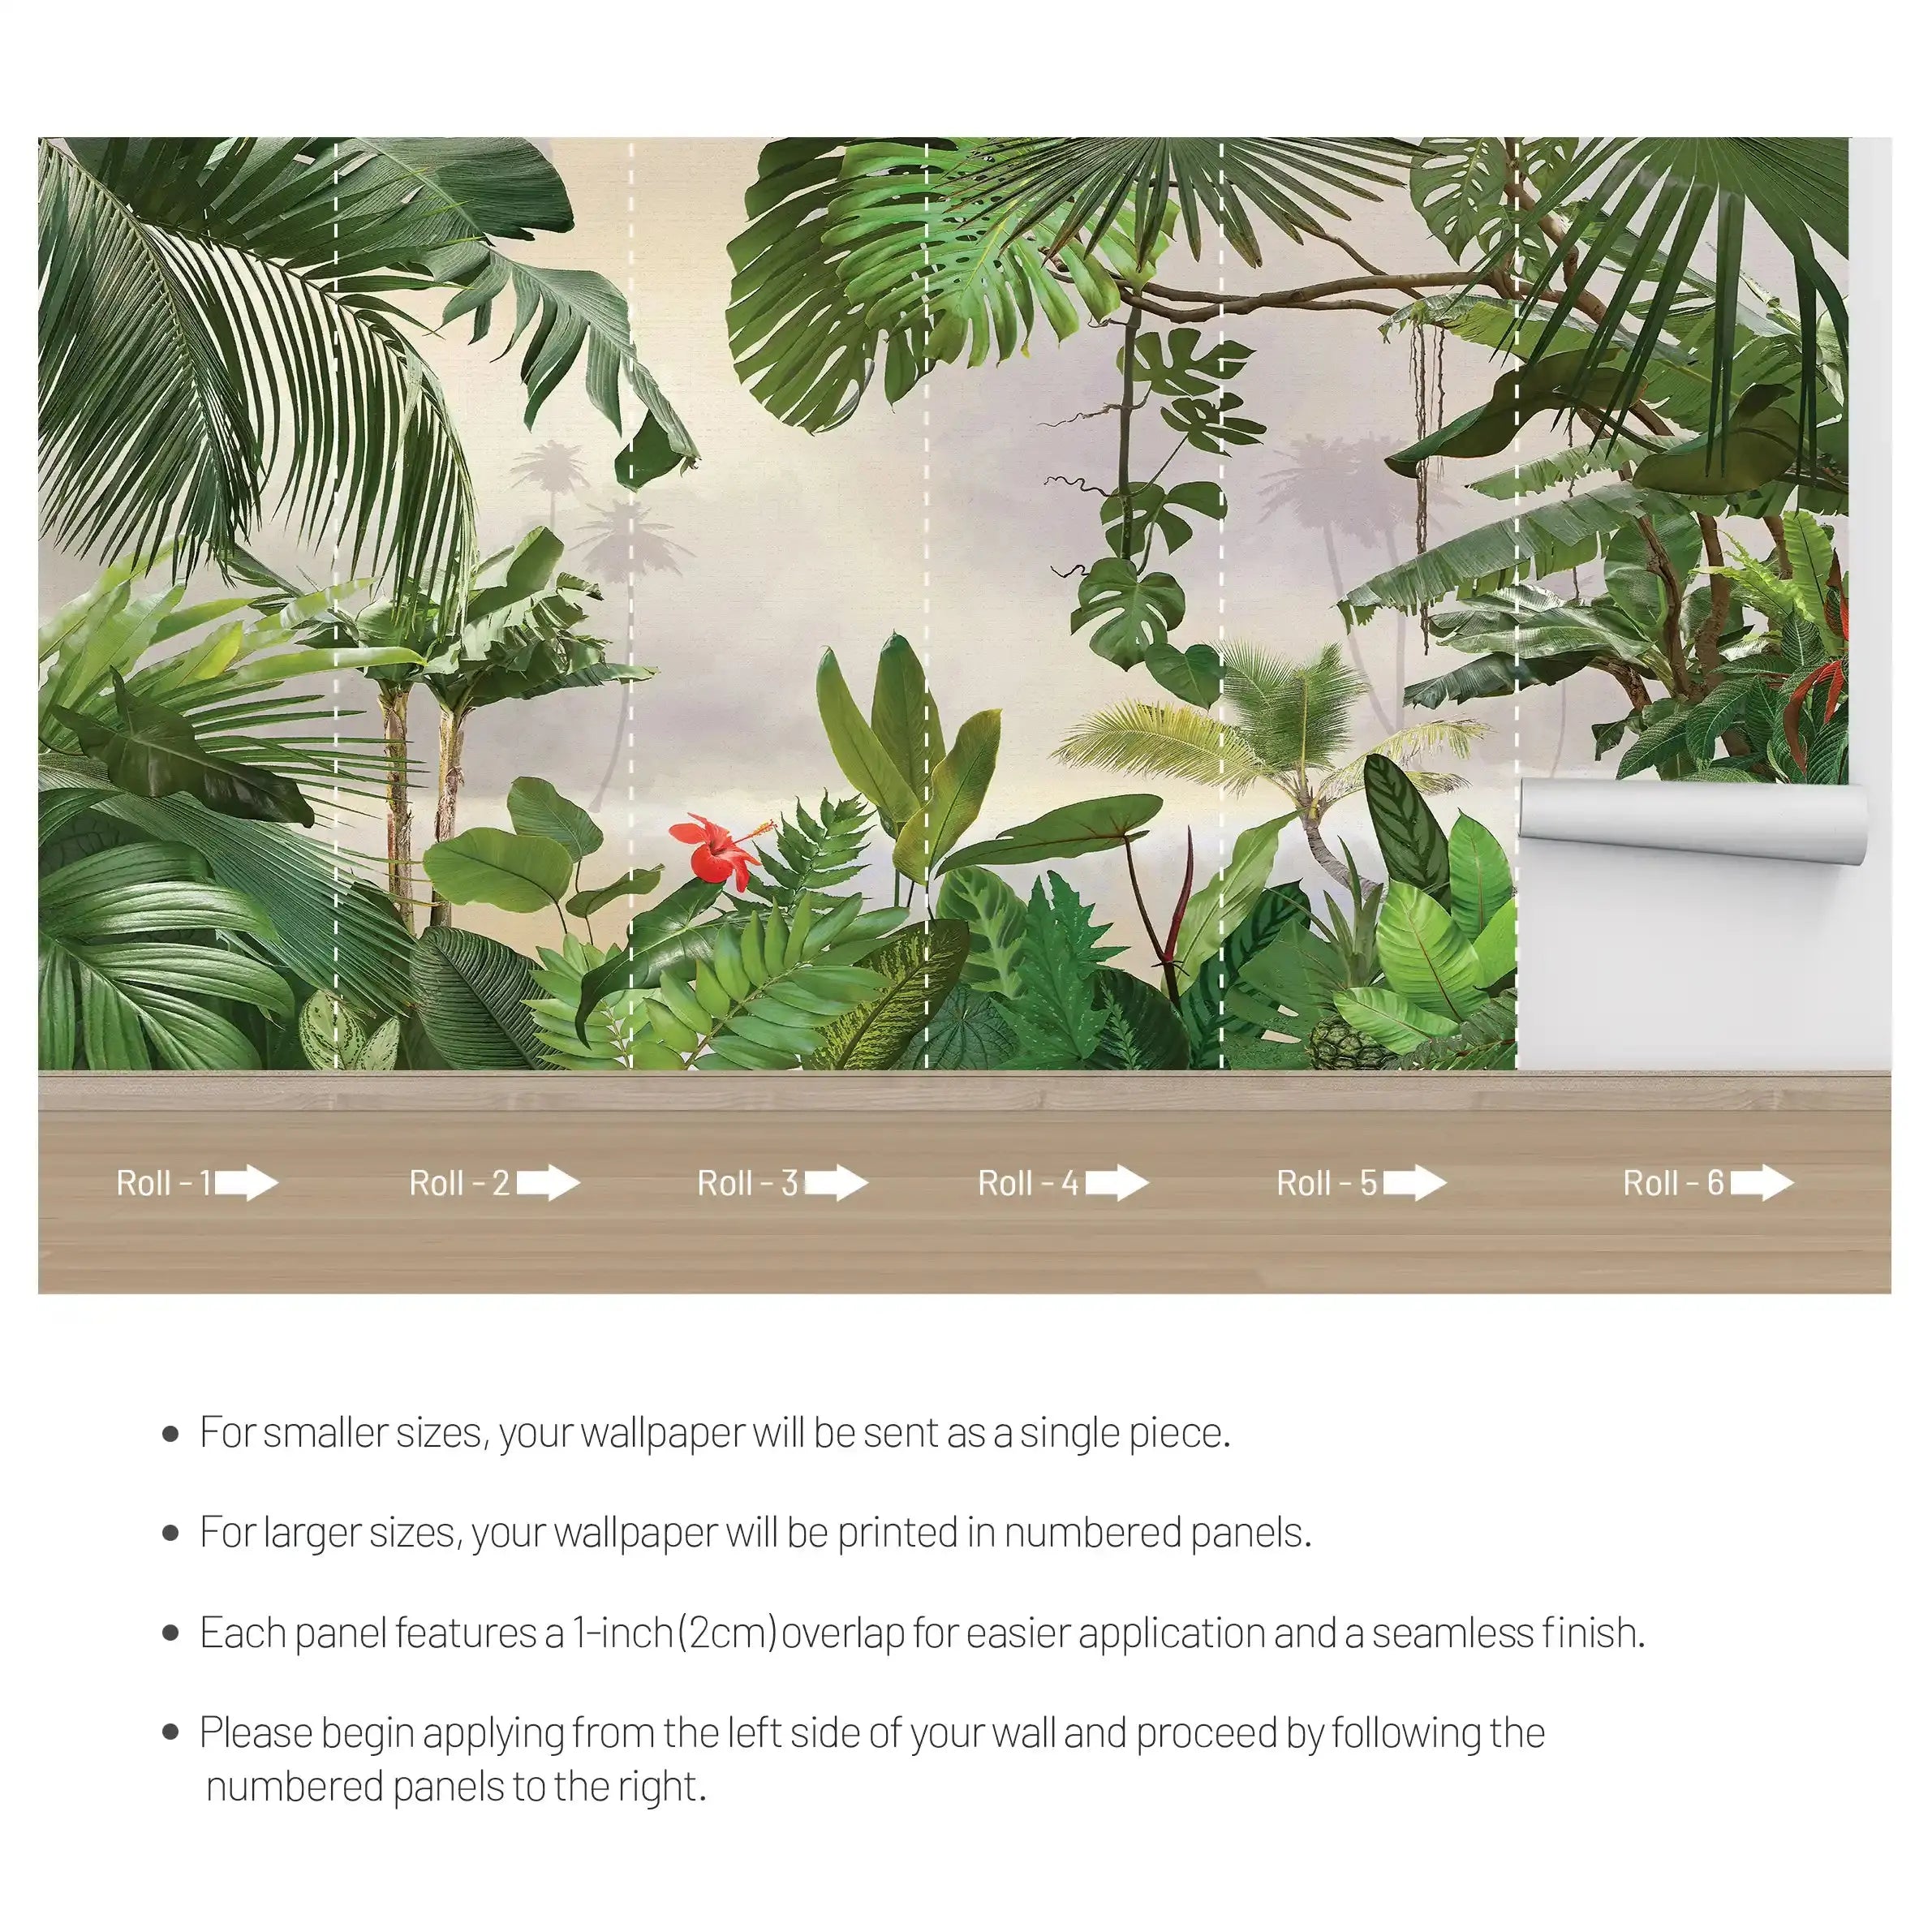 3014-A / Removable Wallpaper Peel and Stick - Abstract Colorful Tropical Plants Design for Modern Home Decor - Artevella